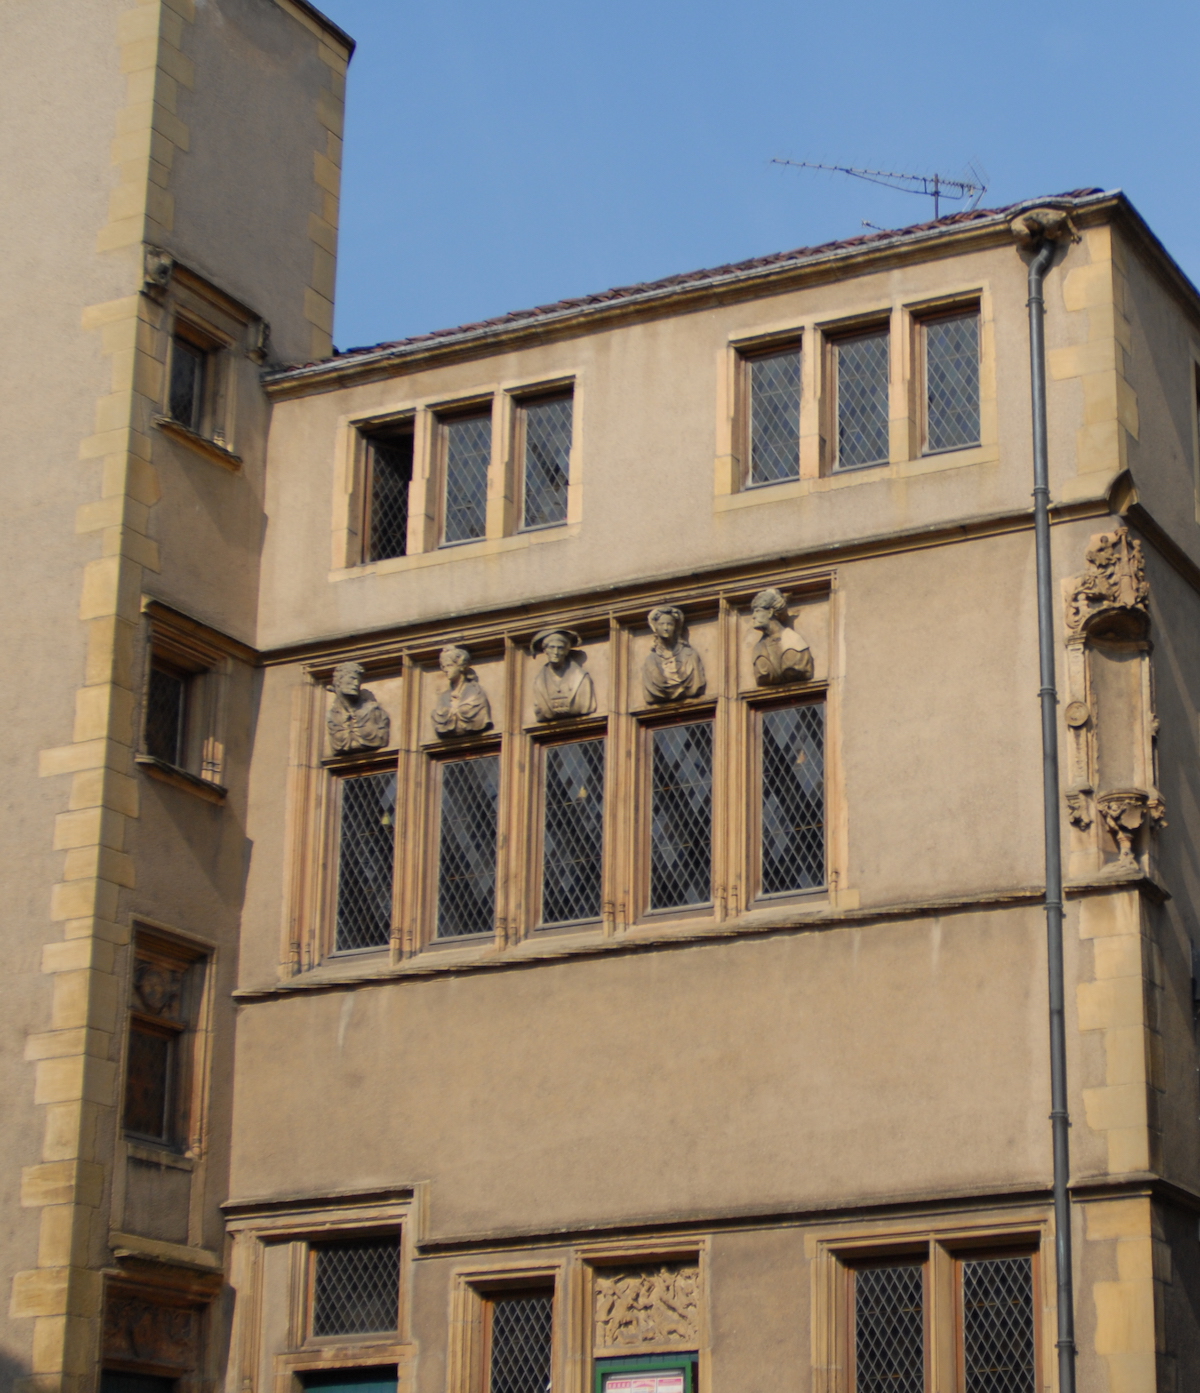 Guided tours of Metz - Doors and windows